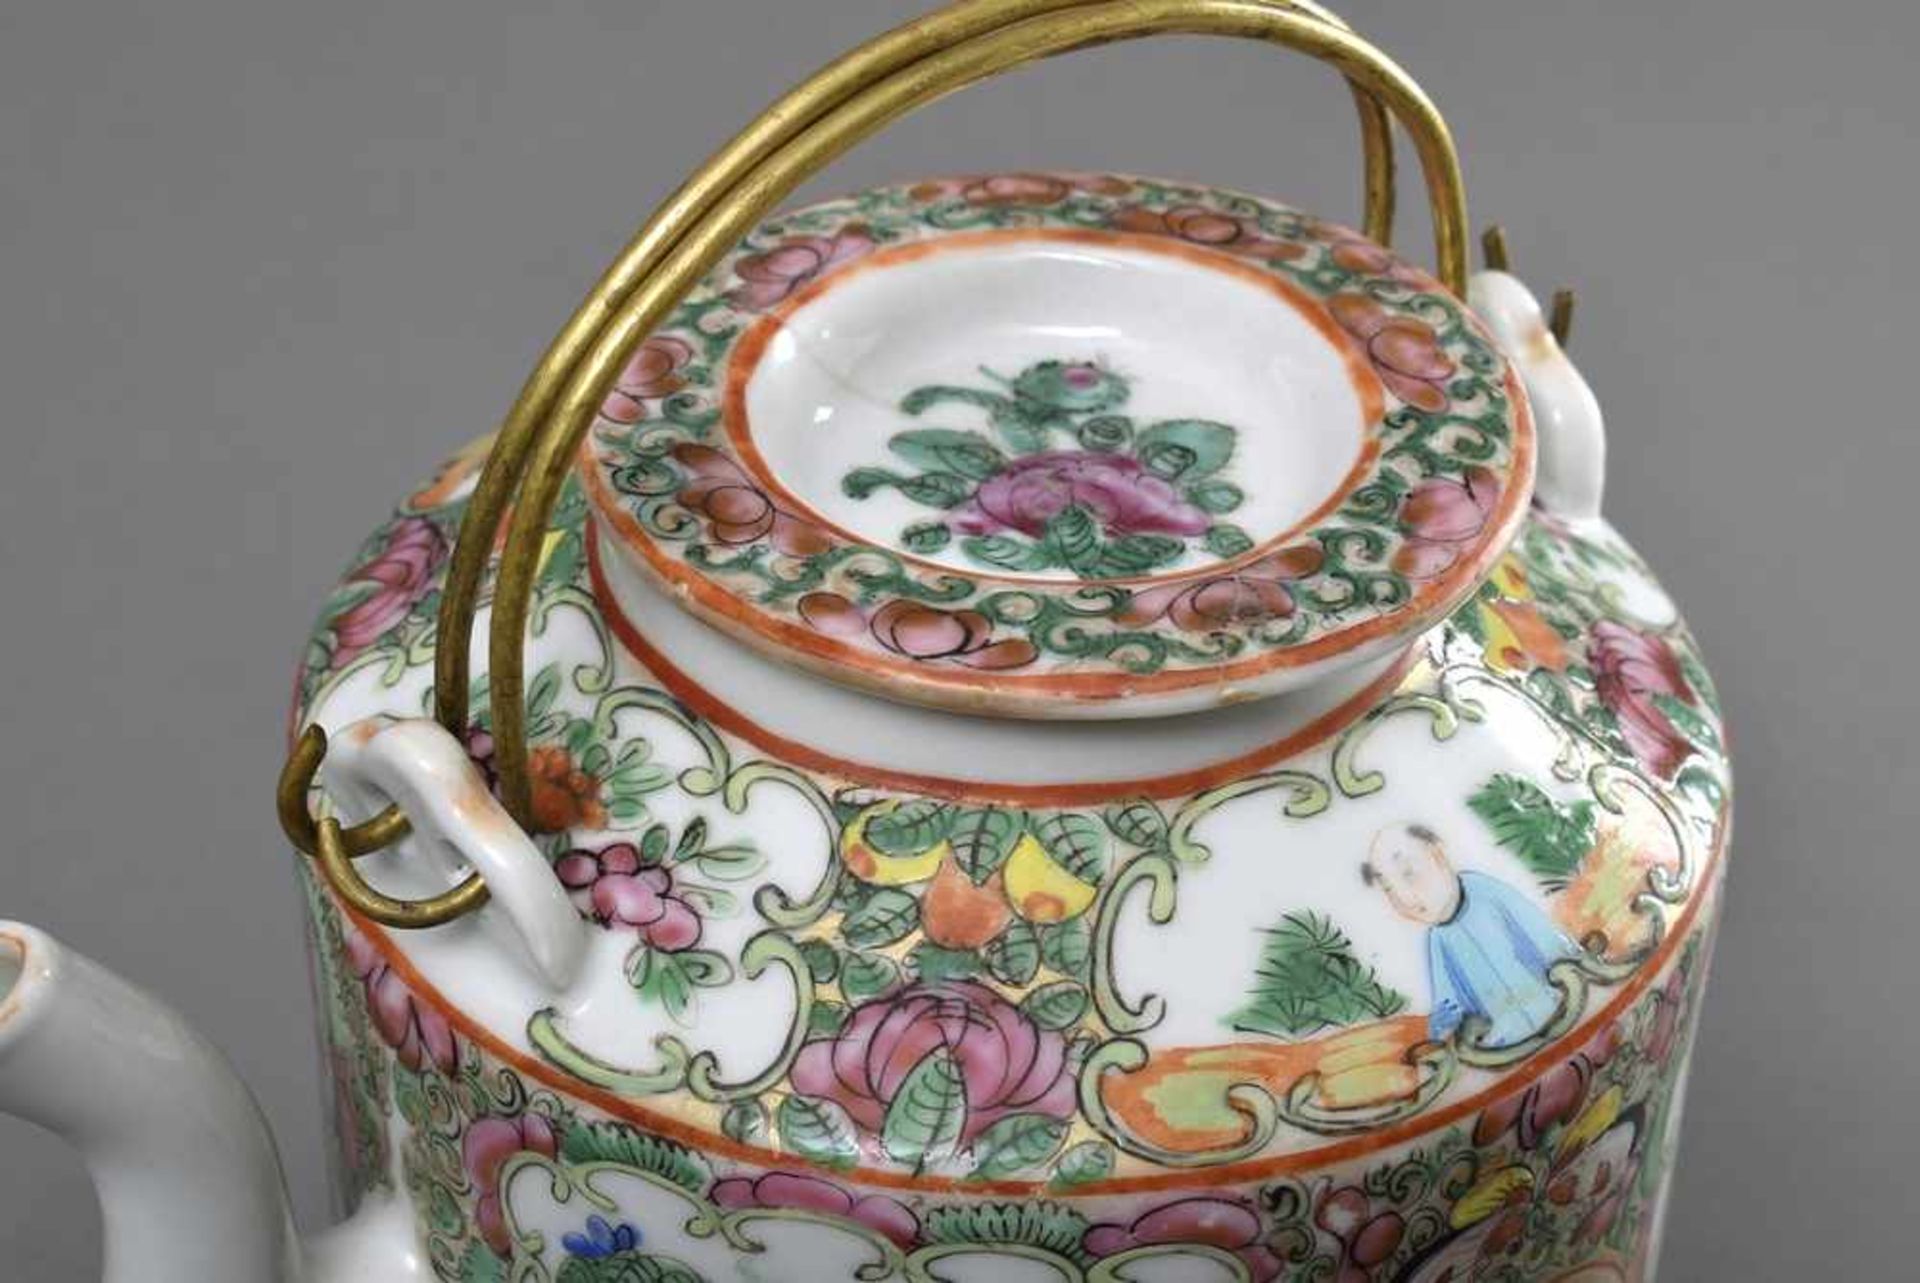 Chinesische Teekanne mit Kantonmalerei, 19.Jh., H. 16cm, Deckel rest. Chinese teapot with cantonal - Image 7 of 7